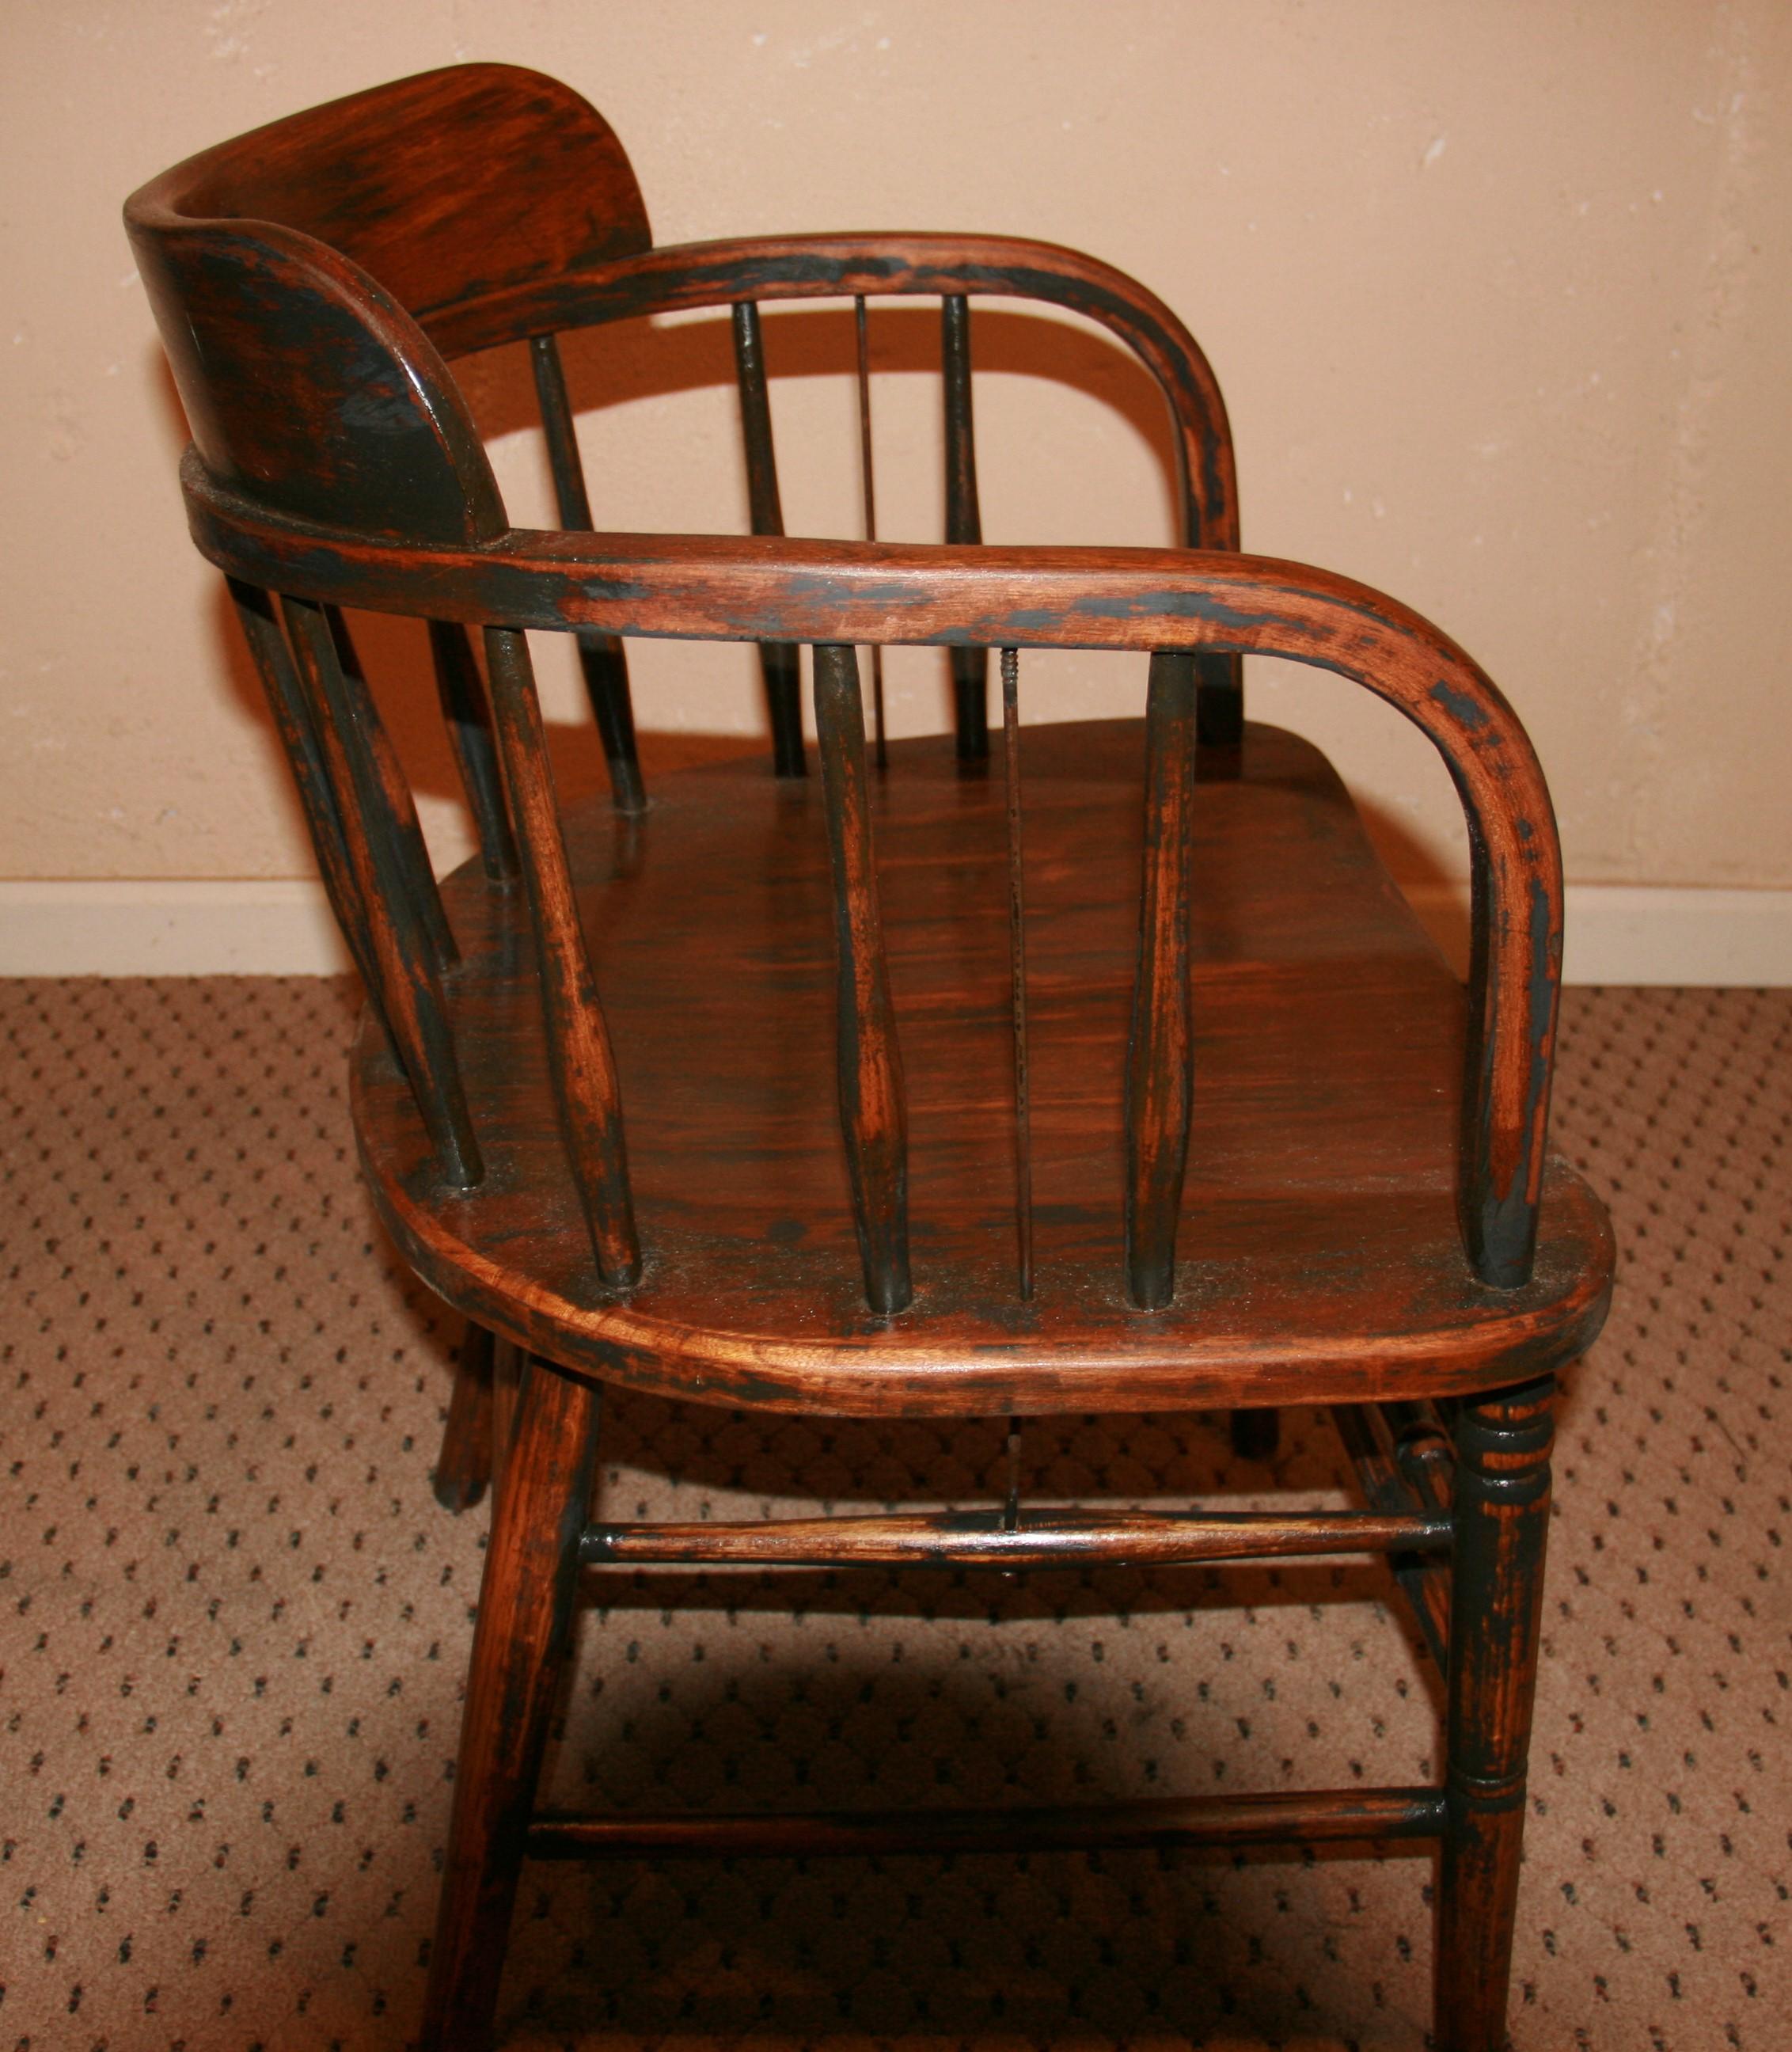 English Barrel Back Wood Chair 1920's In Good Condition For Sale In Douglas Manor, NY